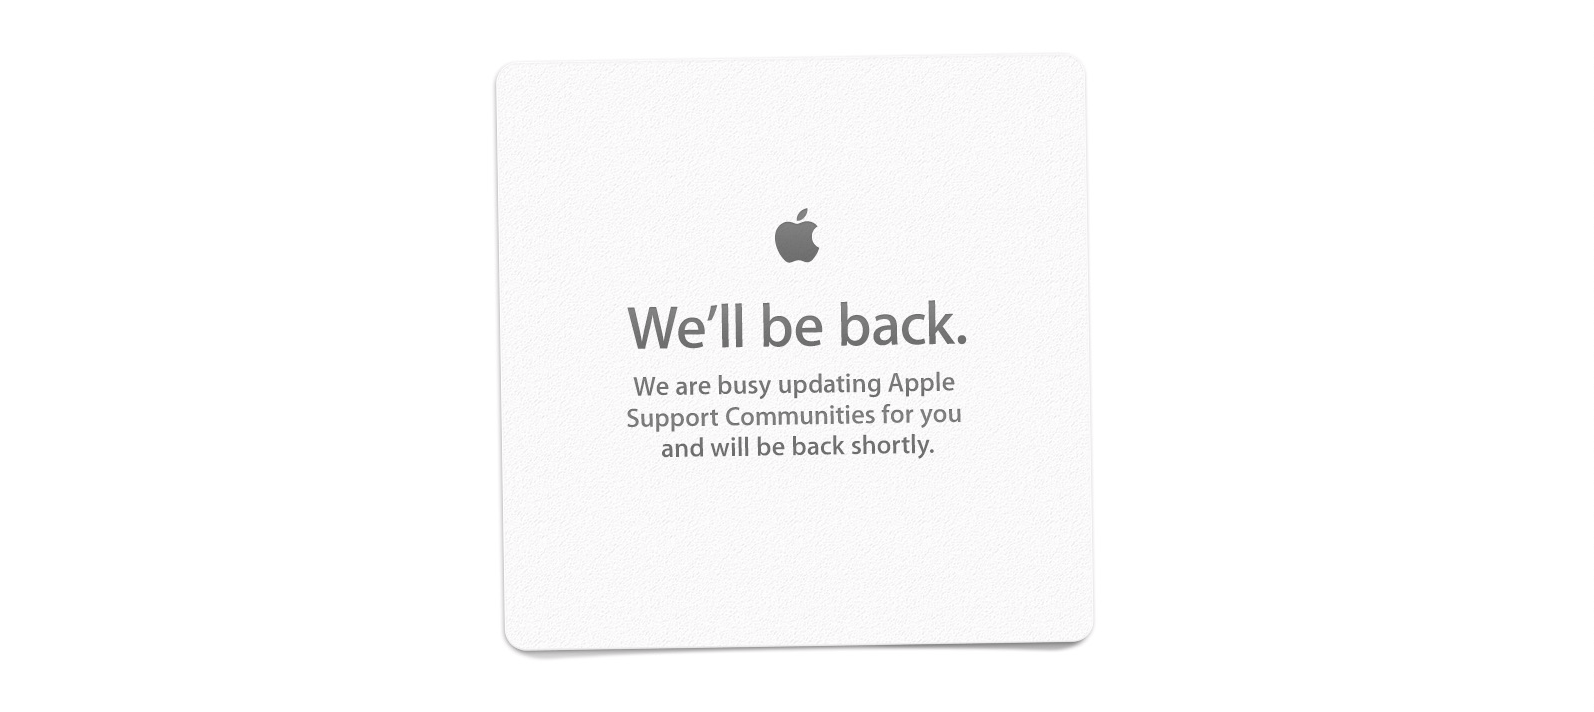 Apple U Logo - Users currently unable to access Apple's Support Communities website ...